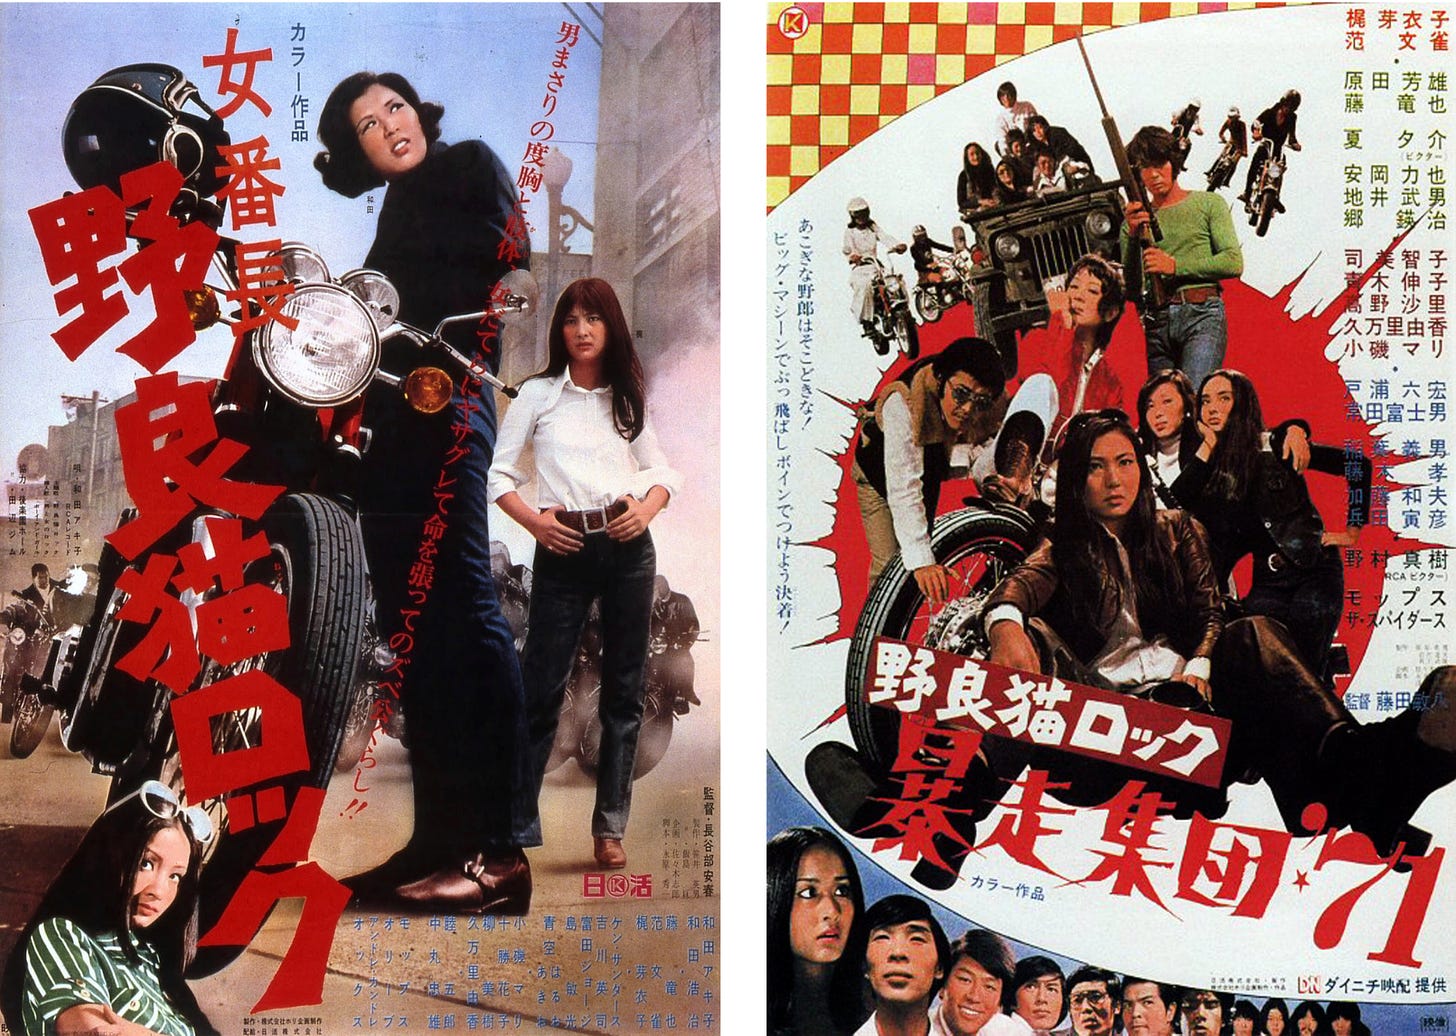 Movie posters for Stray Cat Rock. Badass girl gangs pose in front of motorcycles.